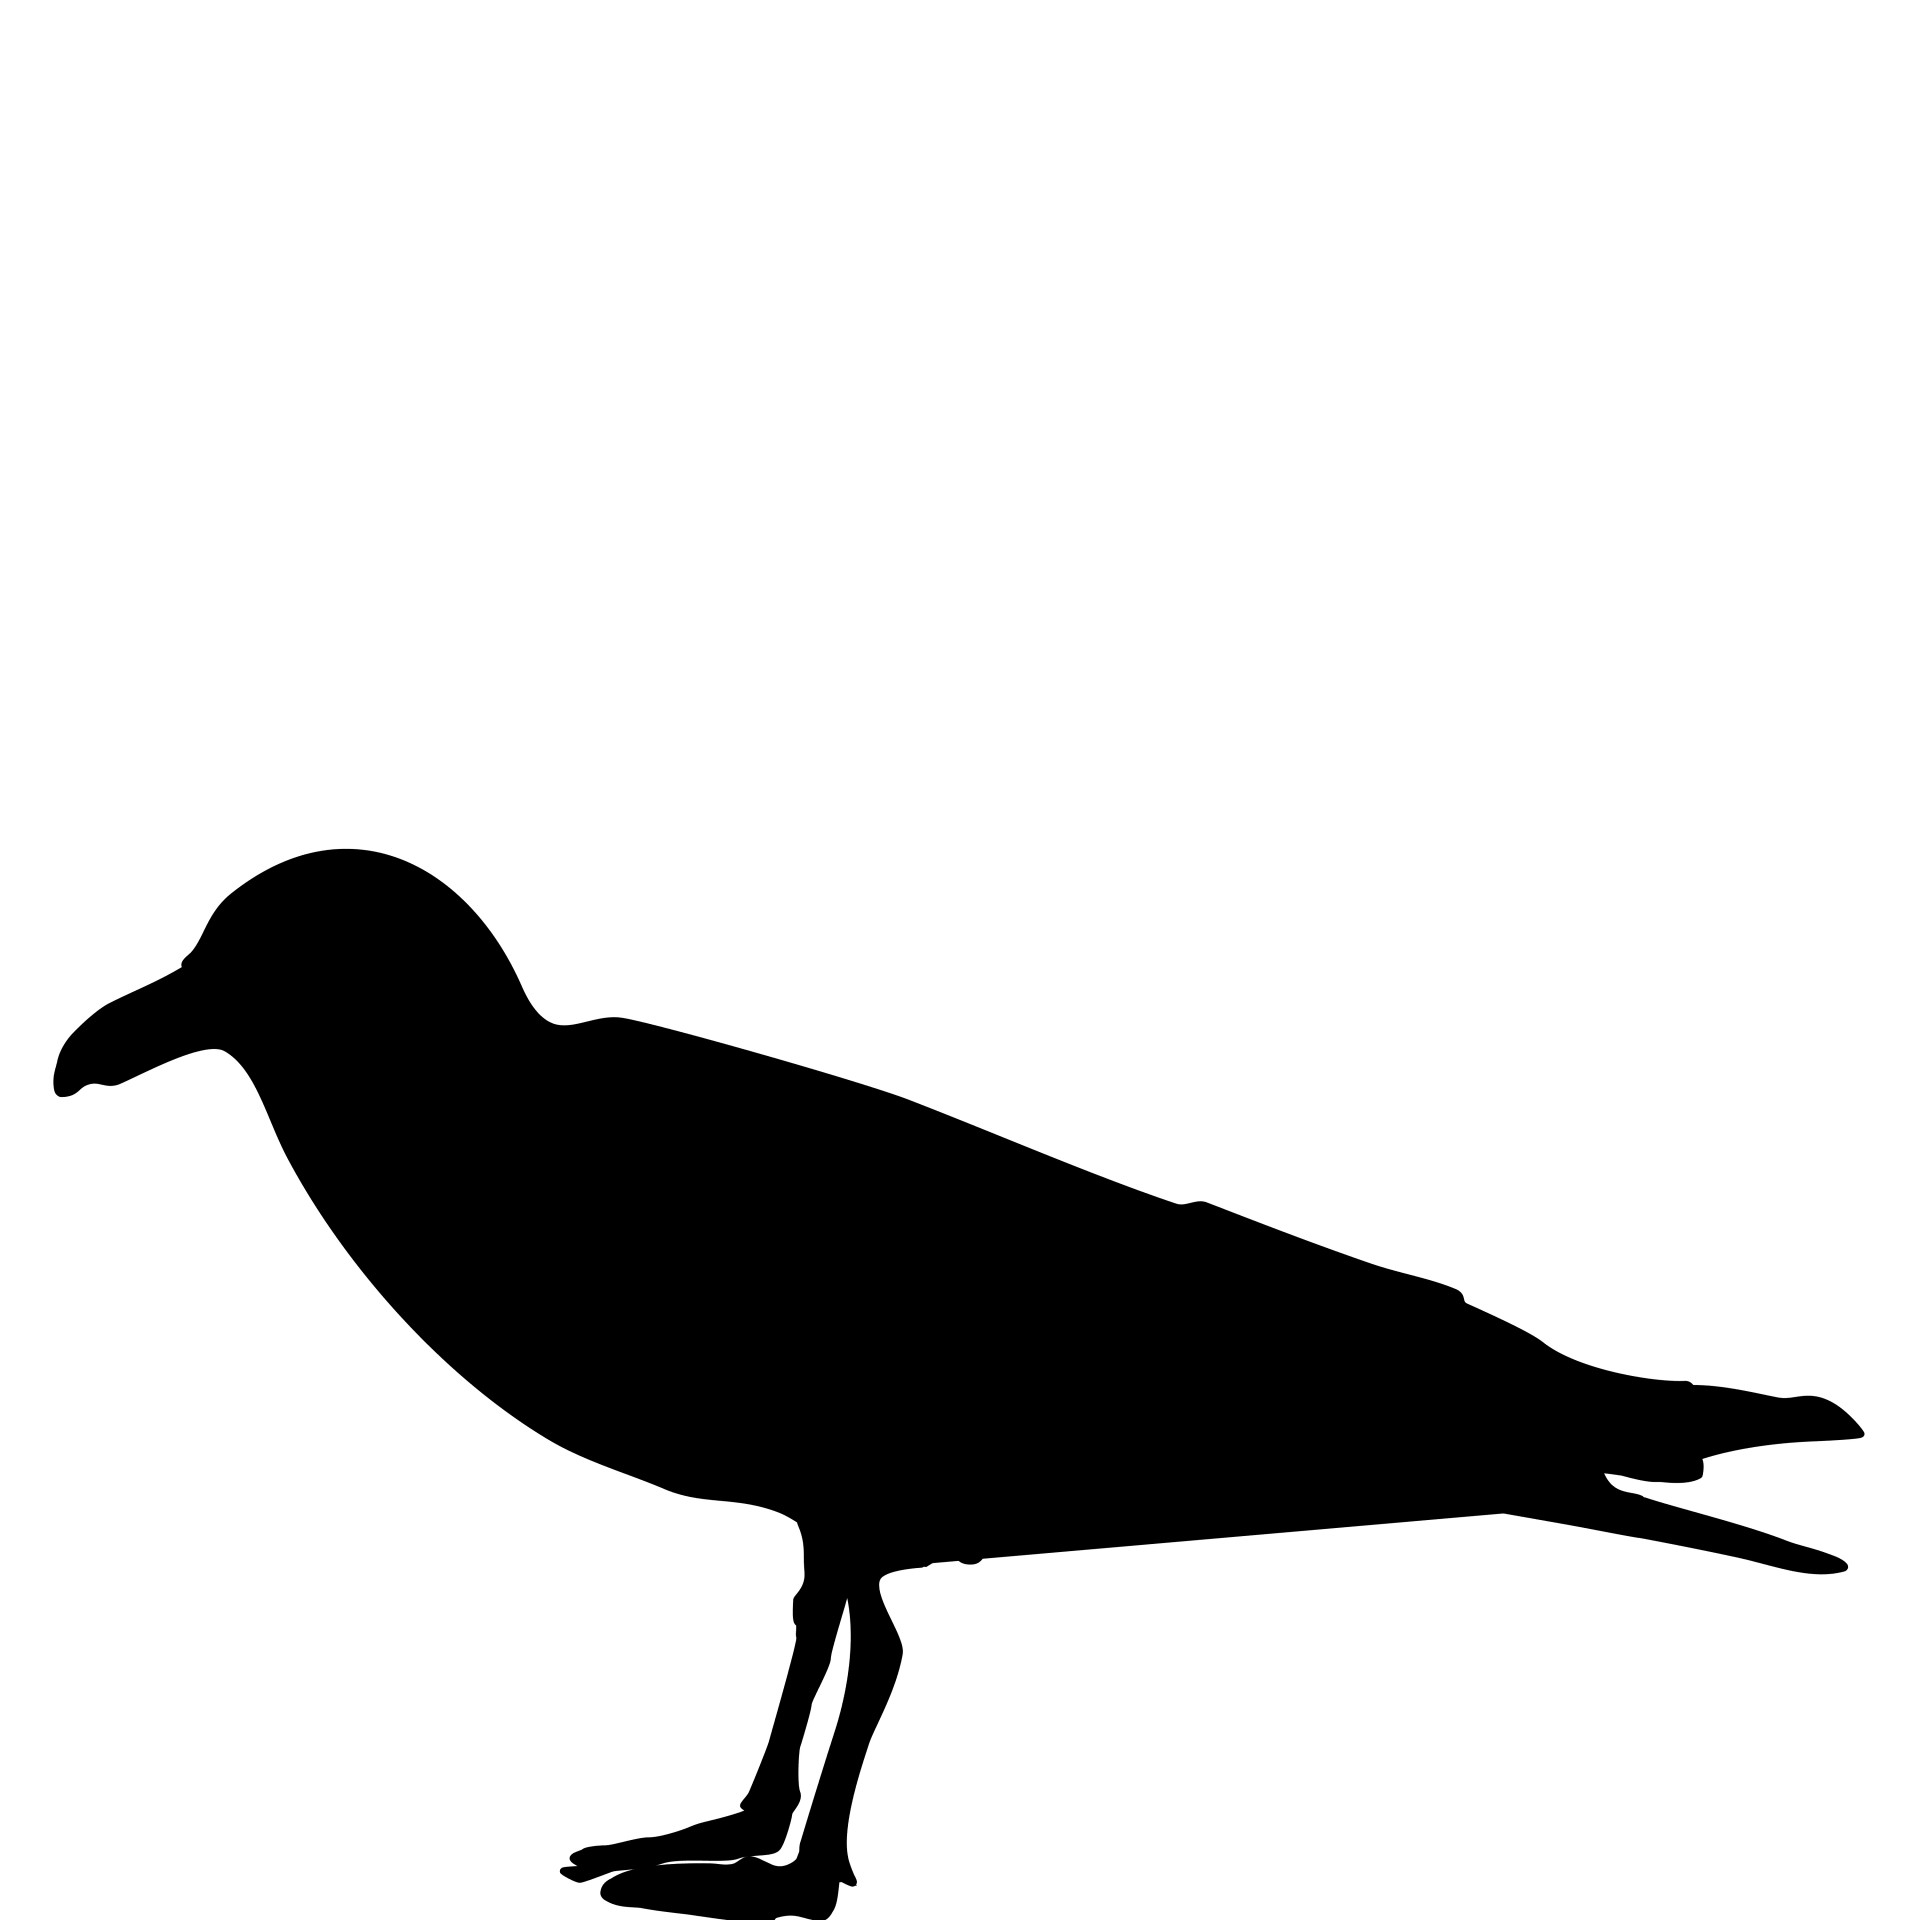 seagull silhouette isolated on a white background